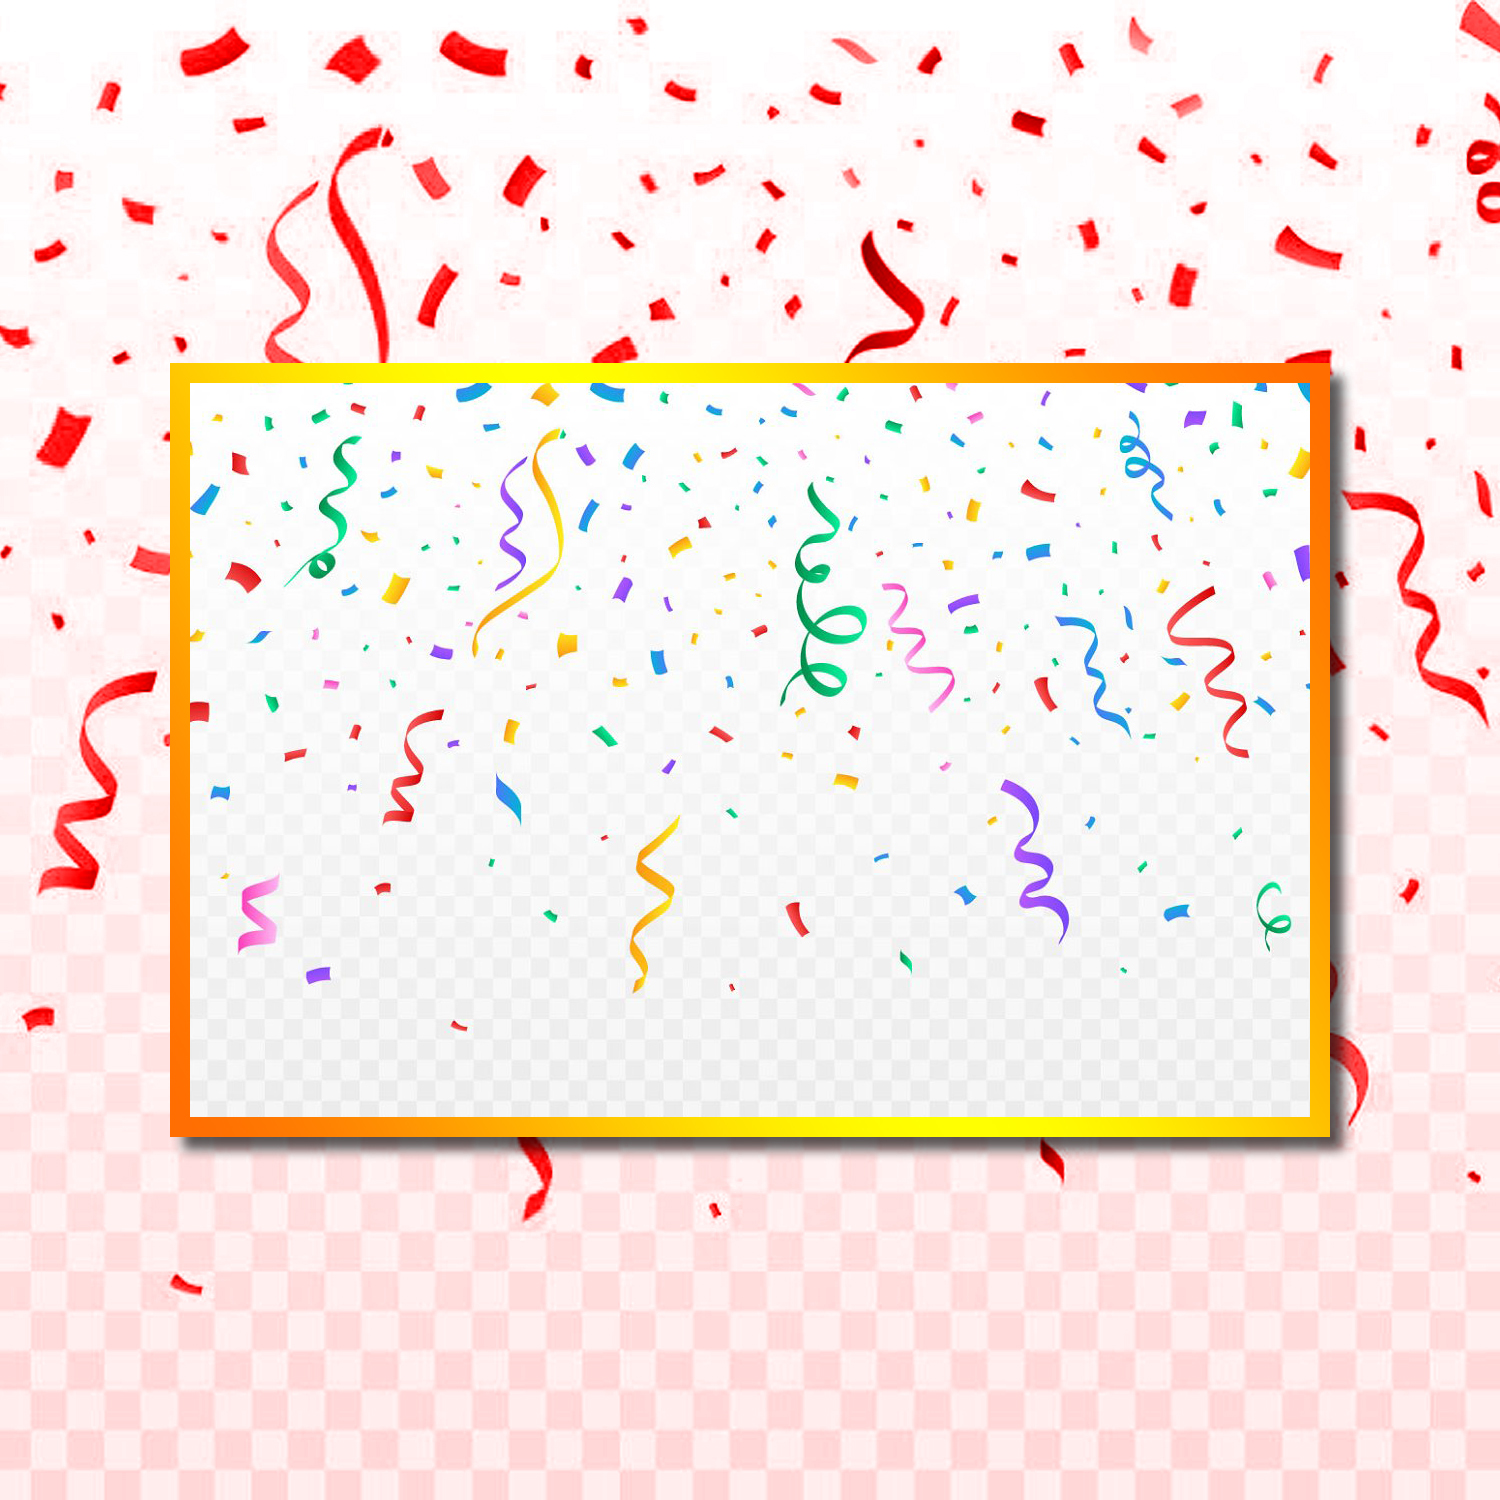 Colorful celebration background with confetti Stock Photo by